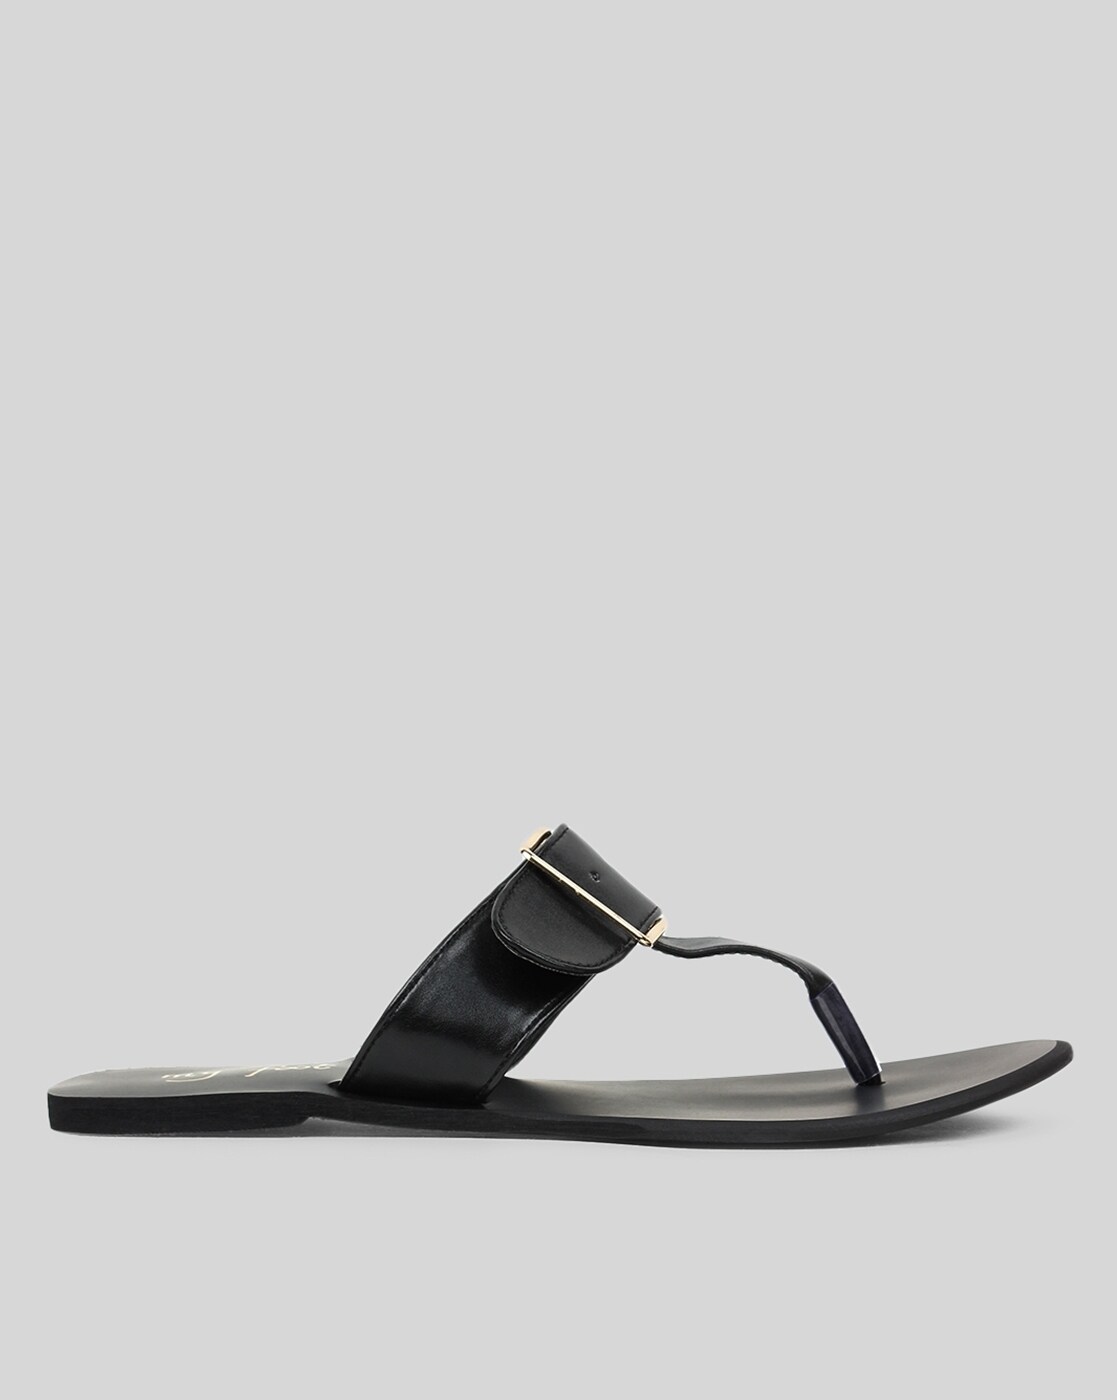 Buy Black Flat Sandals Online In India At Best Price Offers | Tata CLiQ